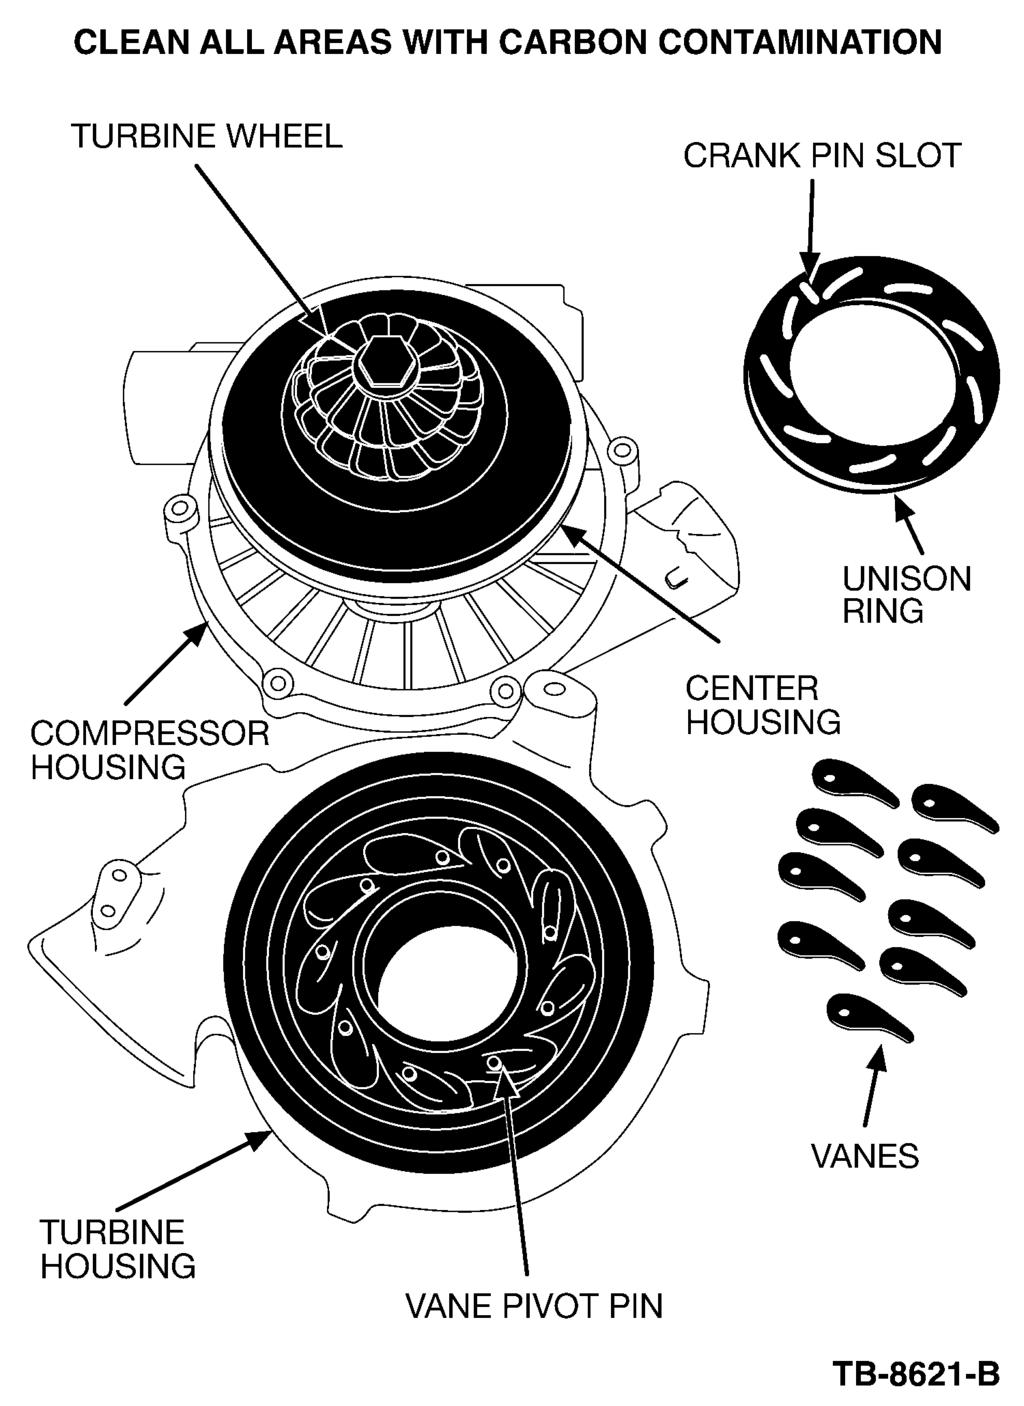 8. Install the six (6) compressor housing screws and torque to 200 lb-in (23 N m). DO NOT CLEAN THE TURBINE WHEEL AND USE CAUTION WHEN CLEANING AROUND IT. 9.